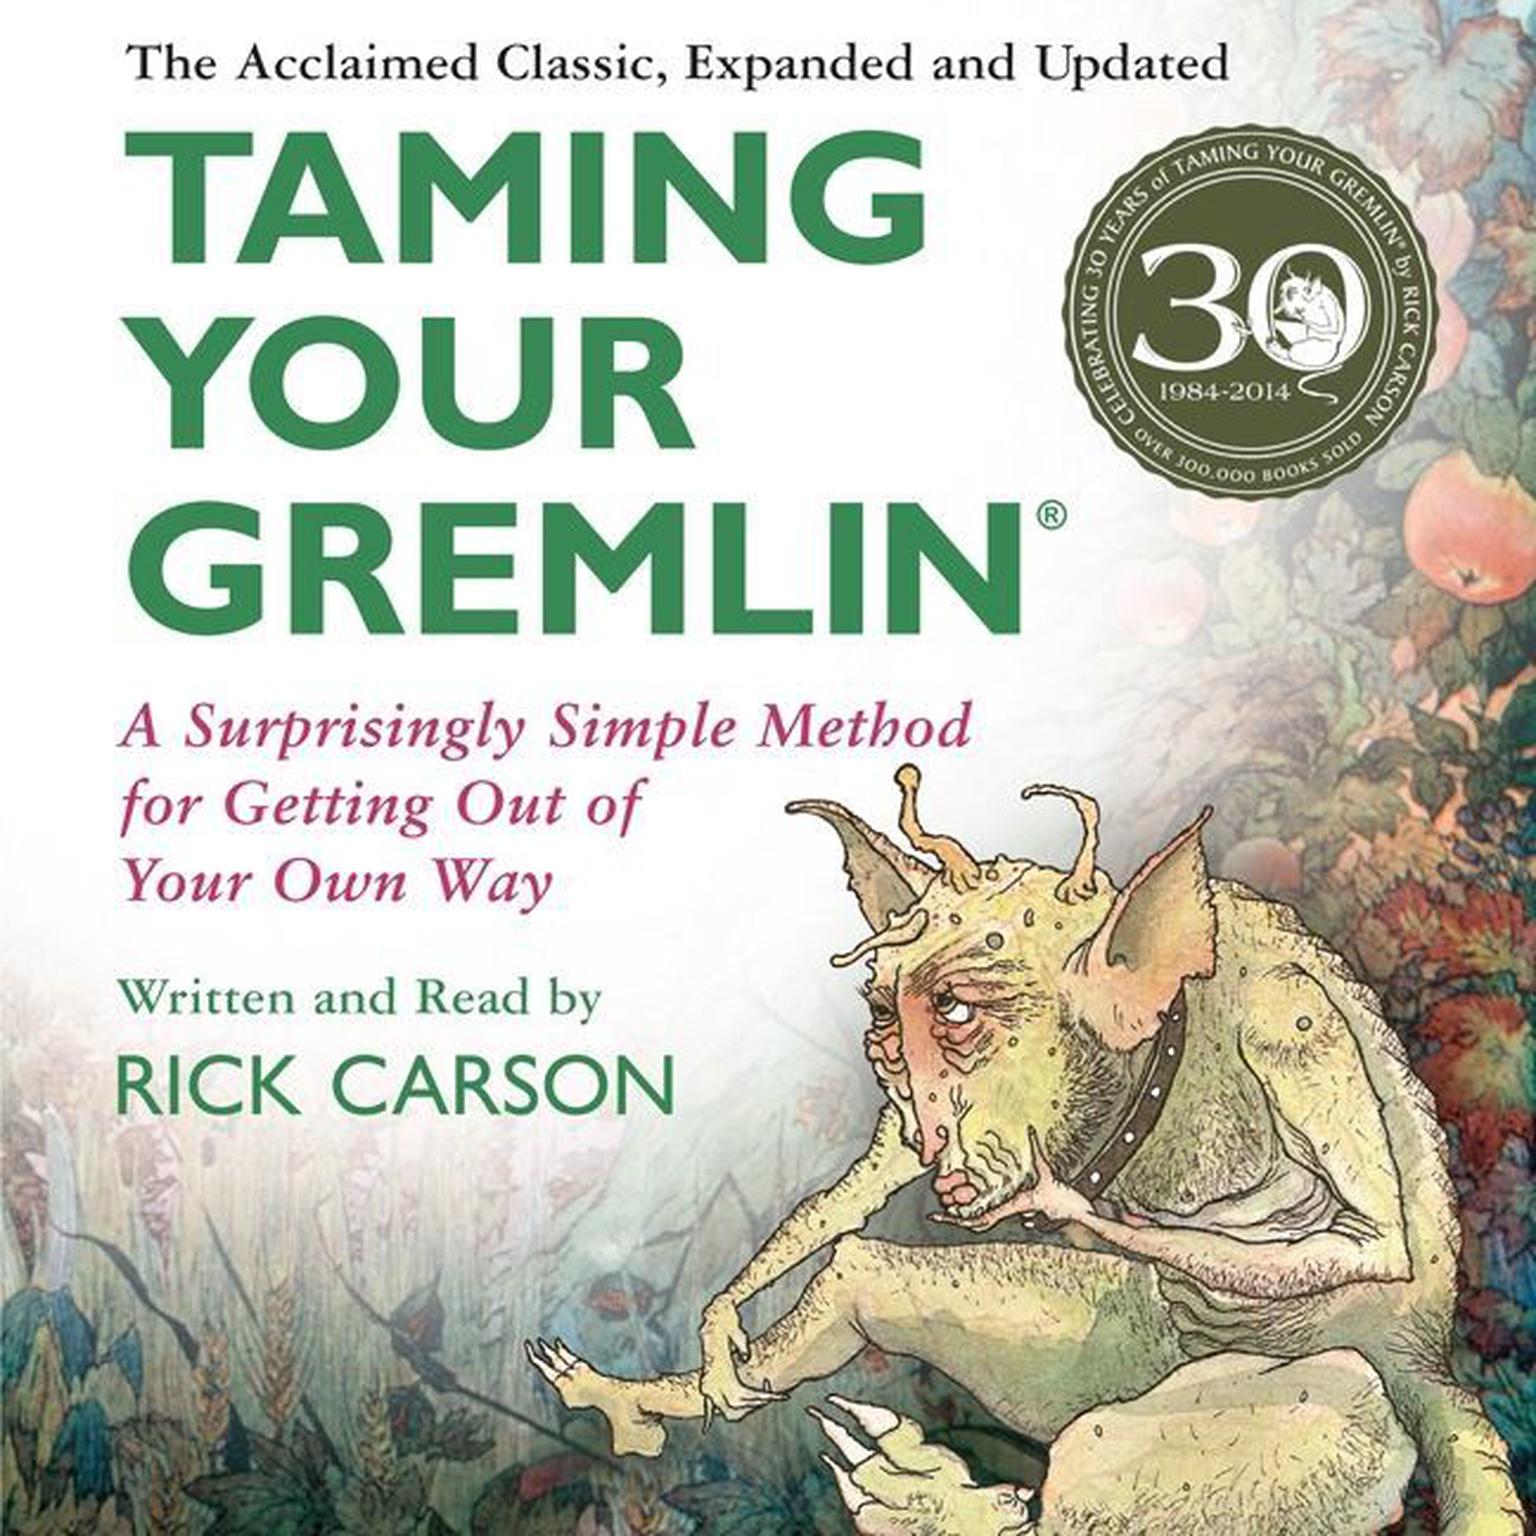 Taming Your Gremlin (Revised Edition): A Surprisingly Simple Method for Getting Out of Your Own Way Audiobook, by Rick Carson